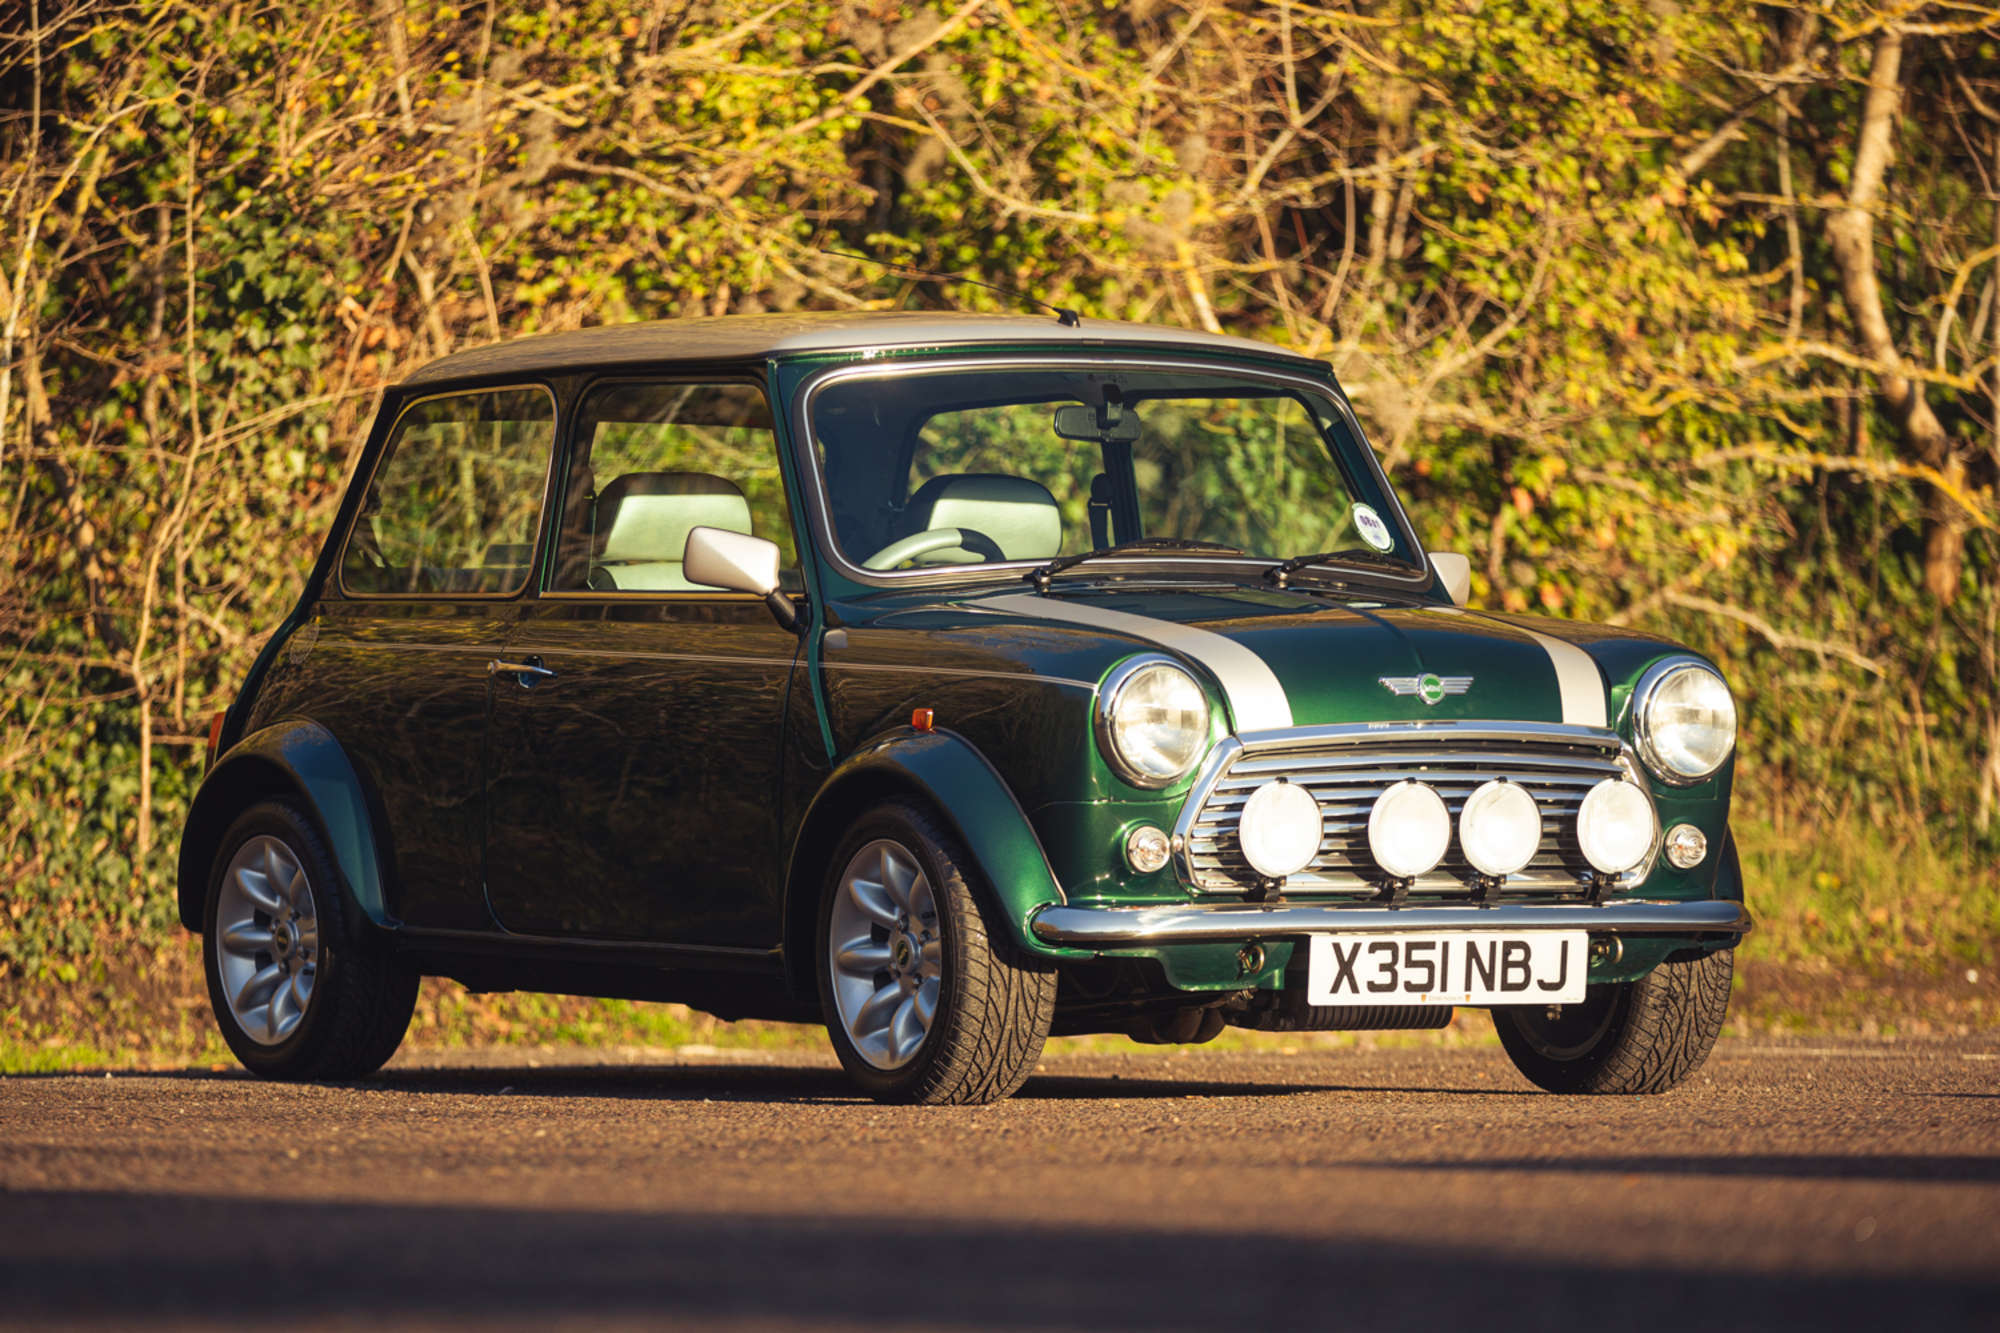 Pride and joy: 734-mile Mini Cooper Sport goes to auction